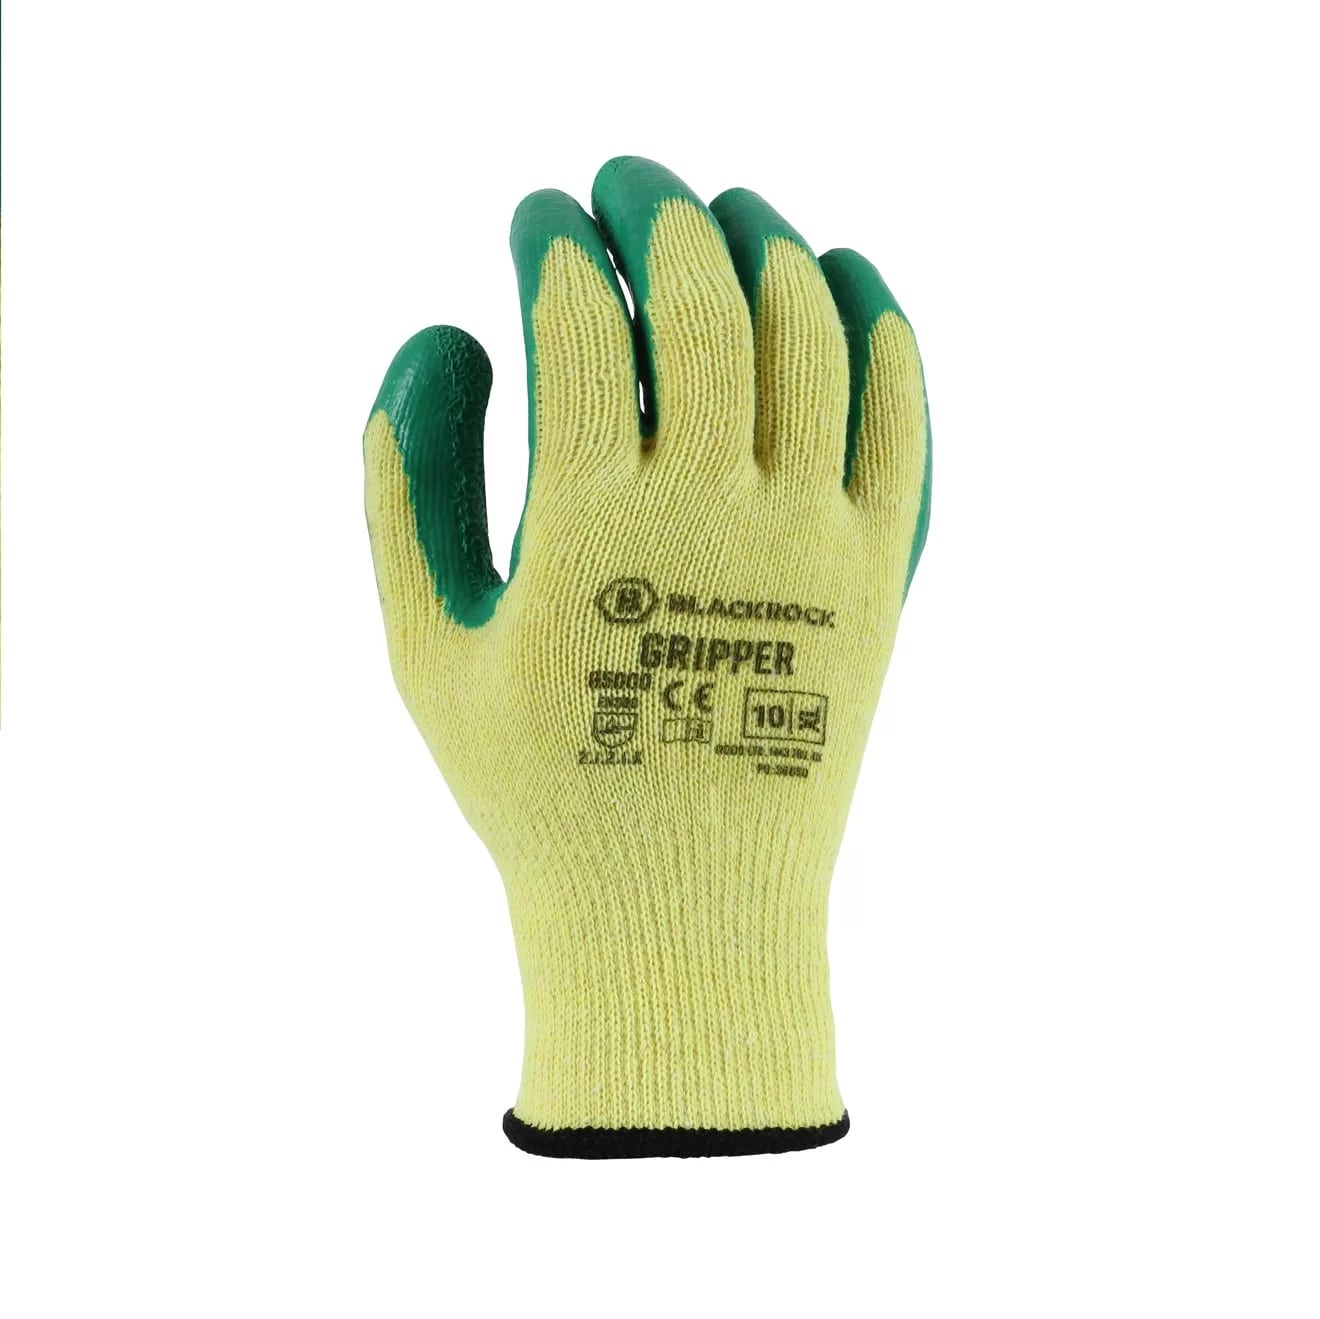 Blackrock Gripper Breathable Dry And Wet Grip Gloves - Pack of 12